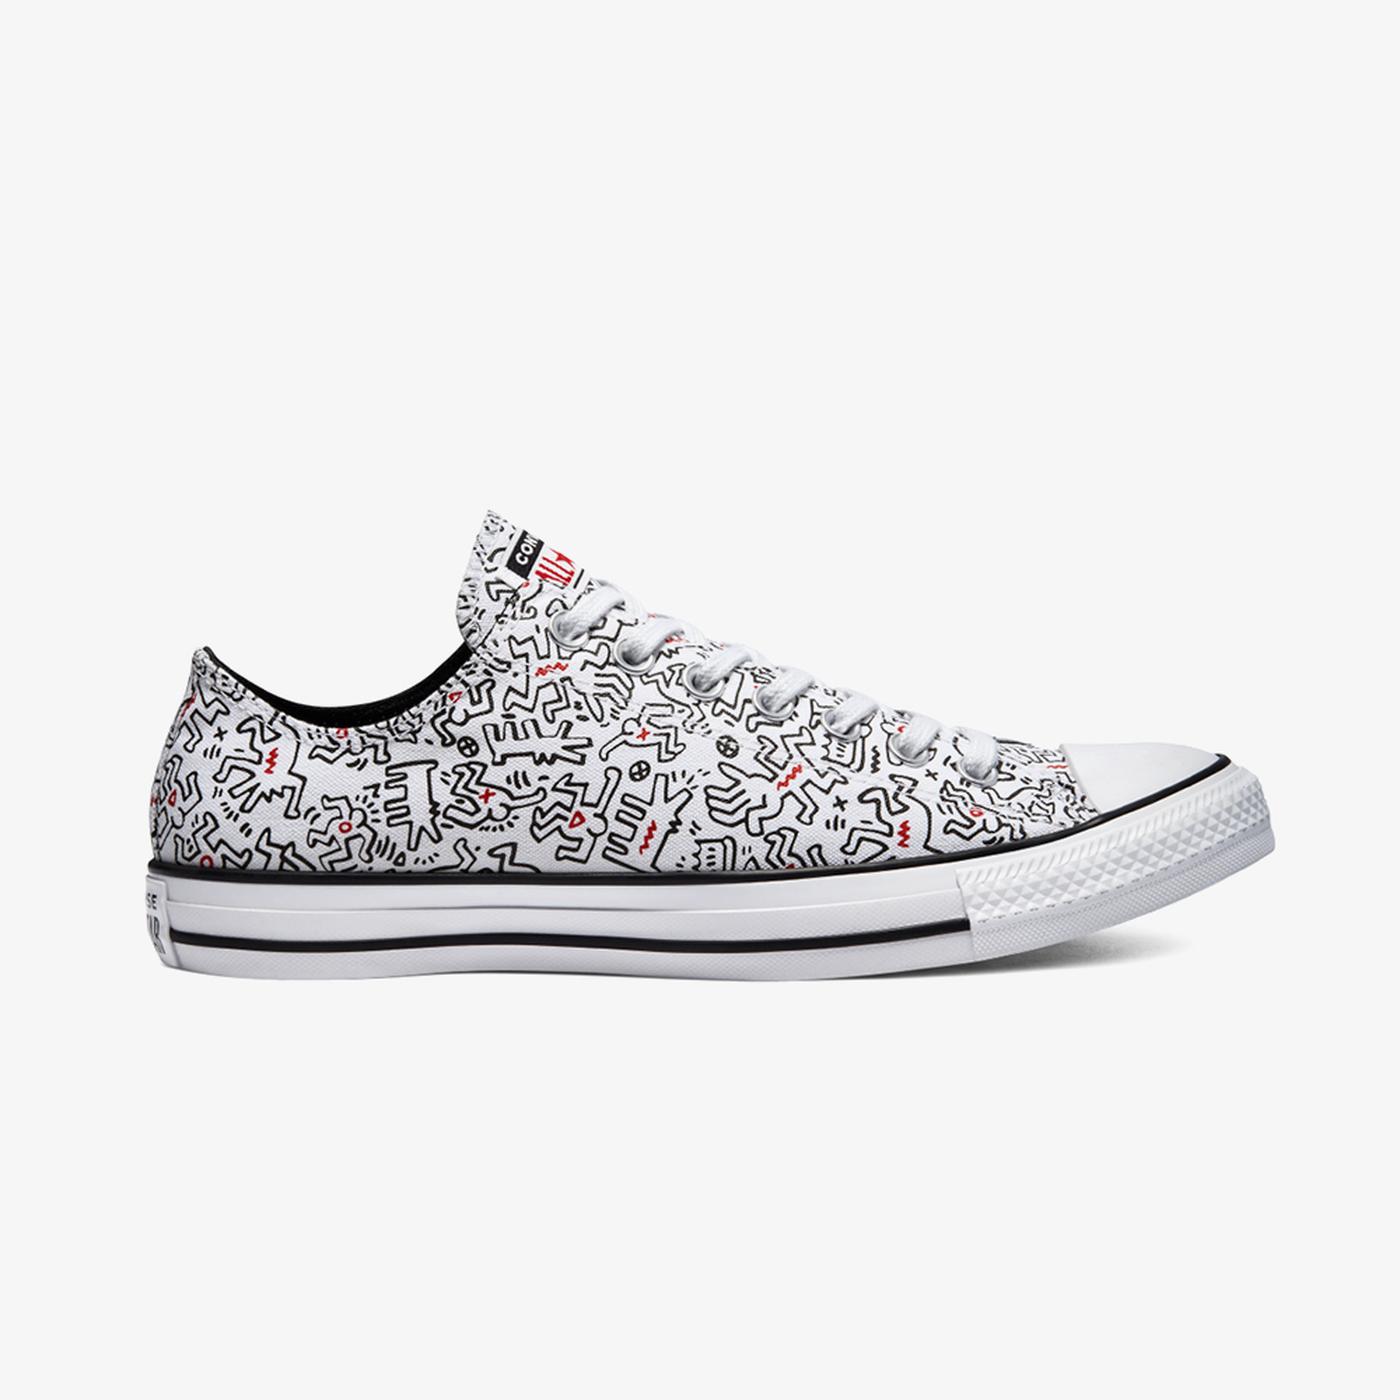 Converse x Keith Haring Chuck Taylor All Star Ox Unisex Beyaz Sneaker